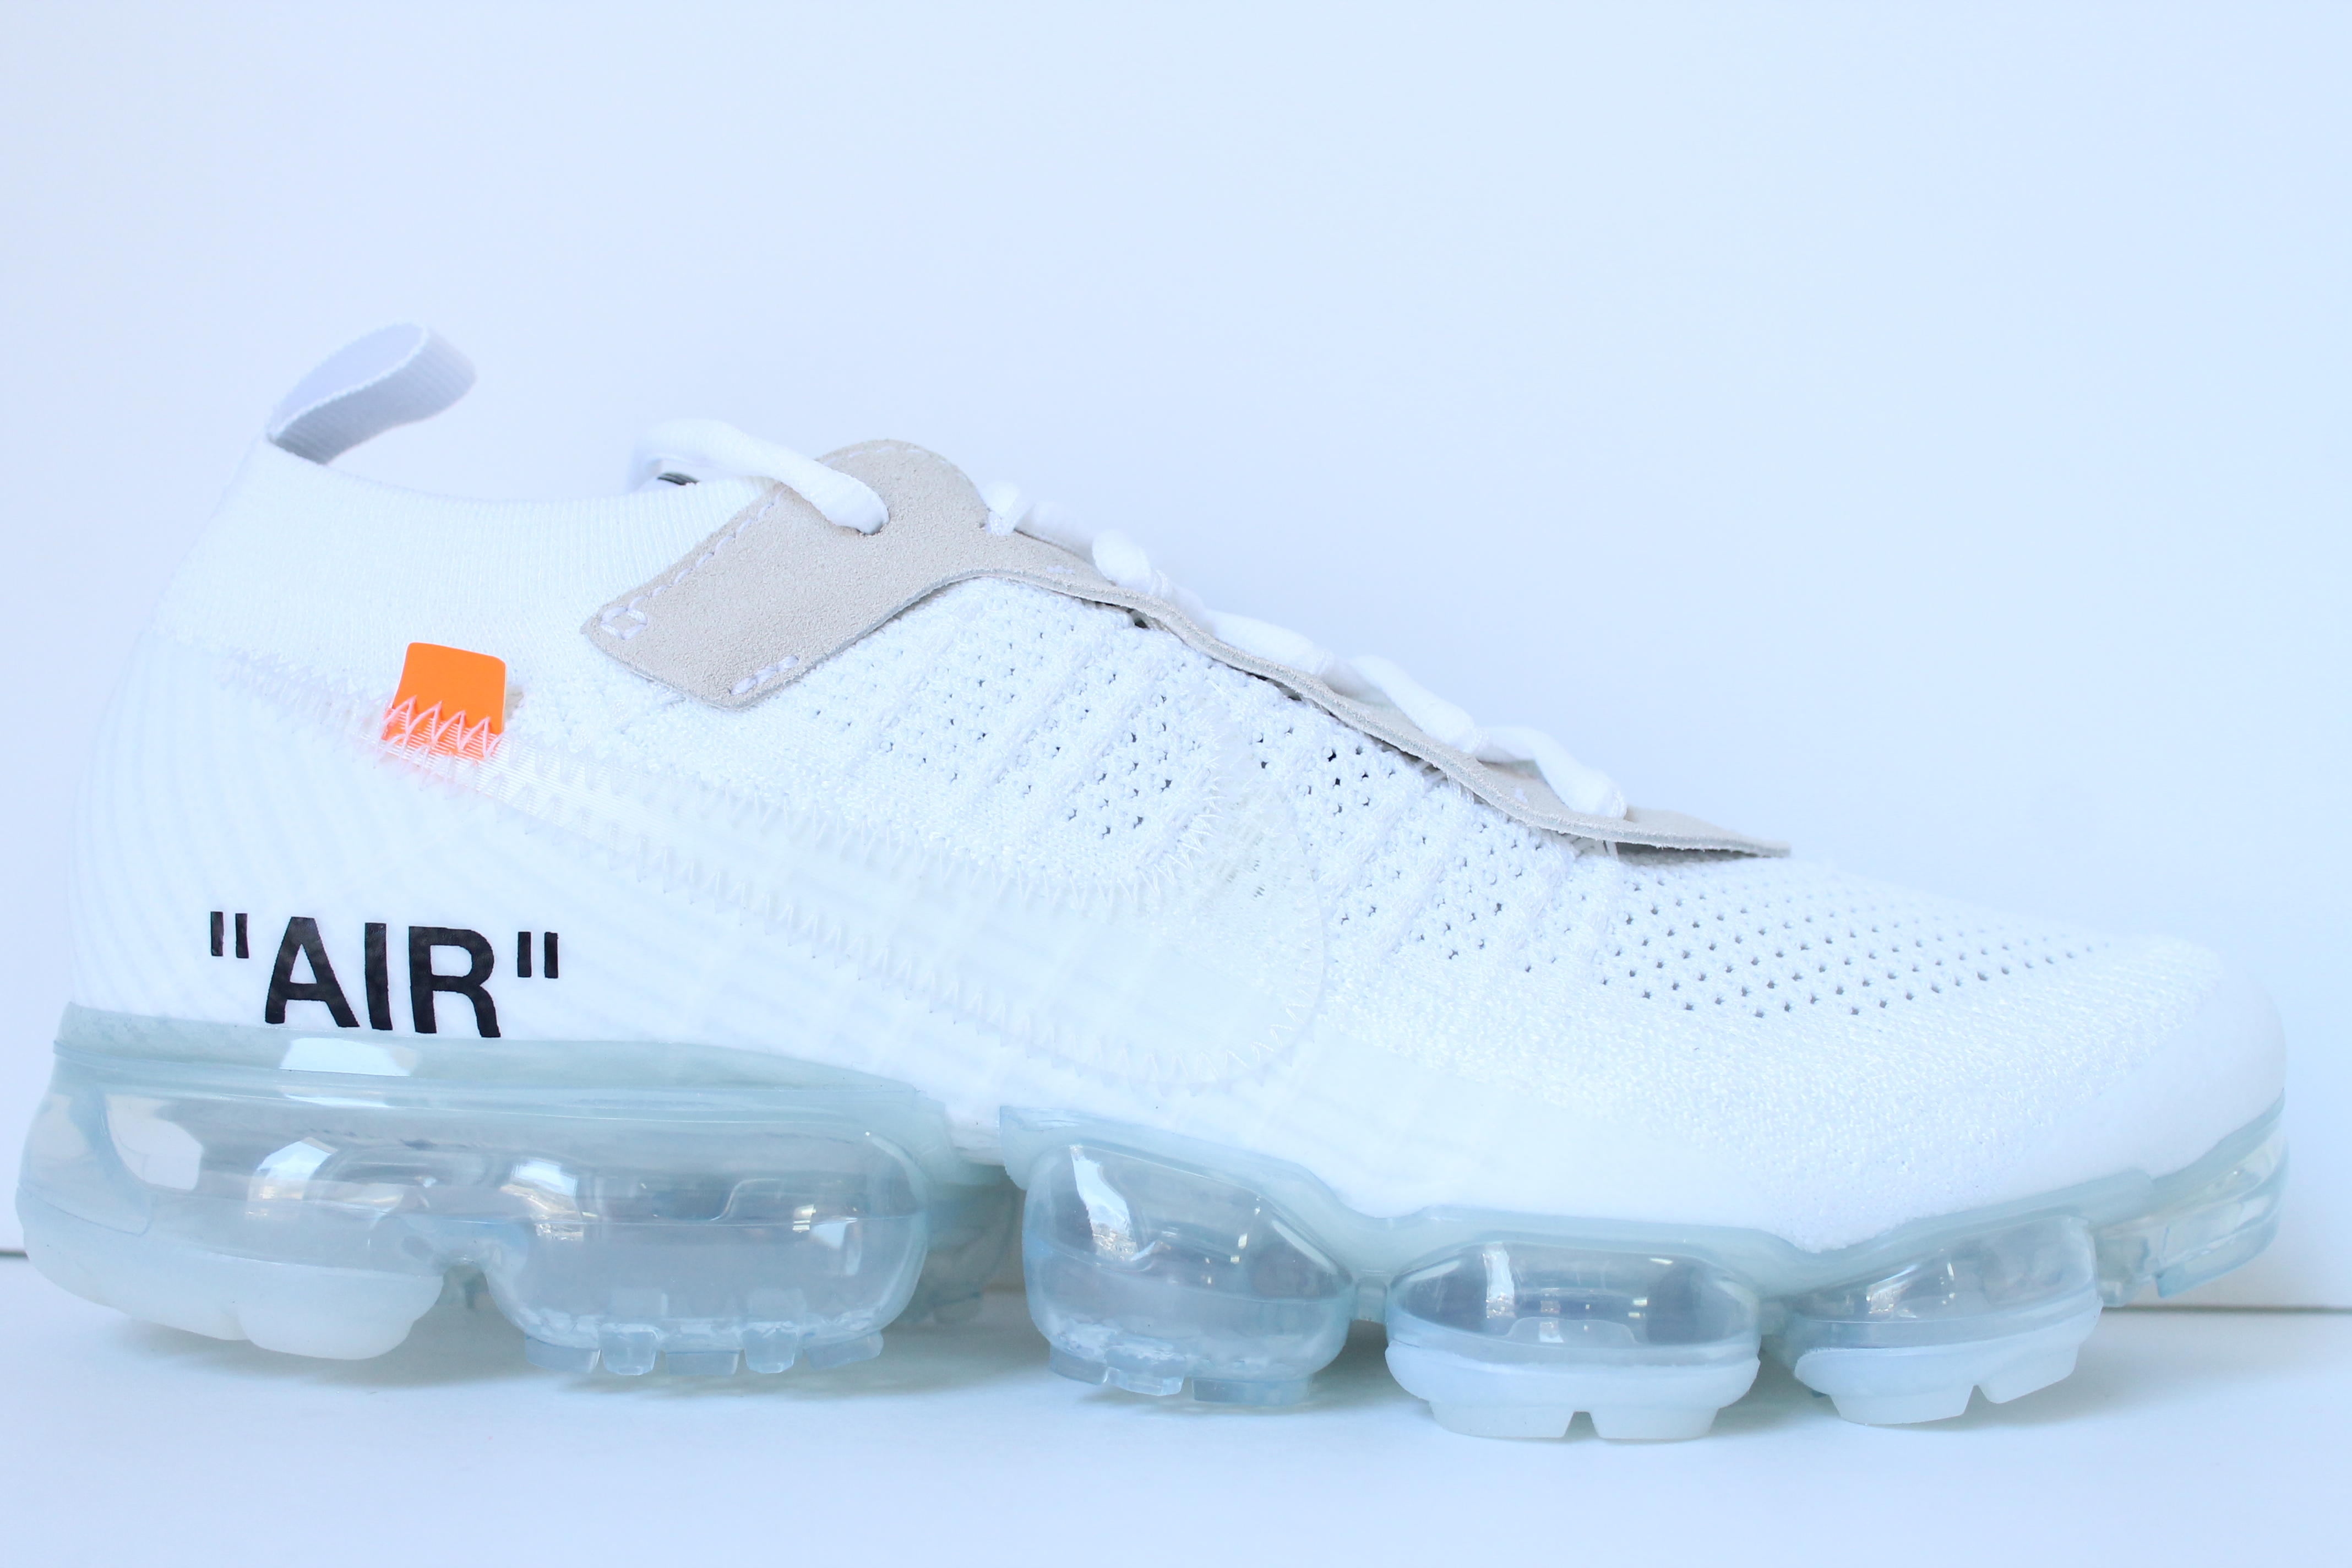 The 10 Nike Air Vapormax FX OFF WHITE Part 2 created by Virgil